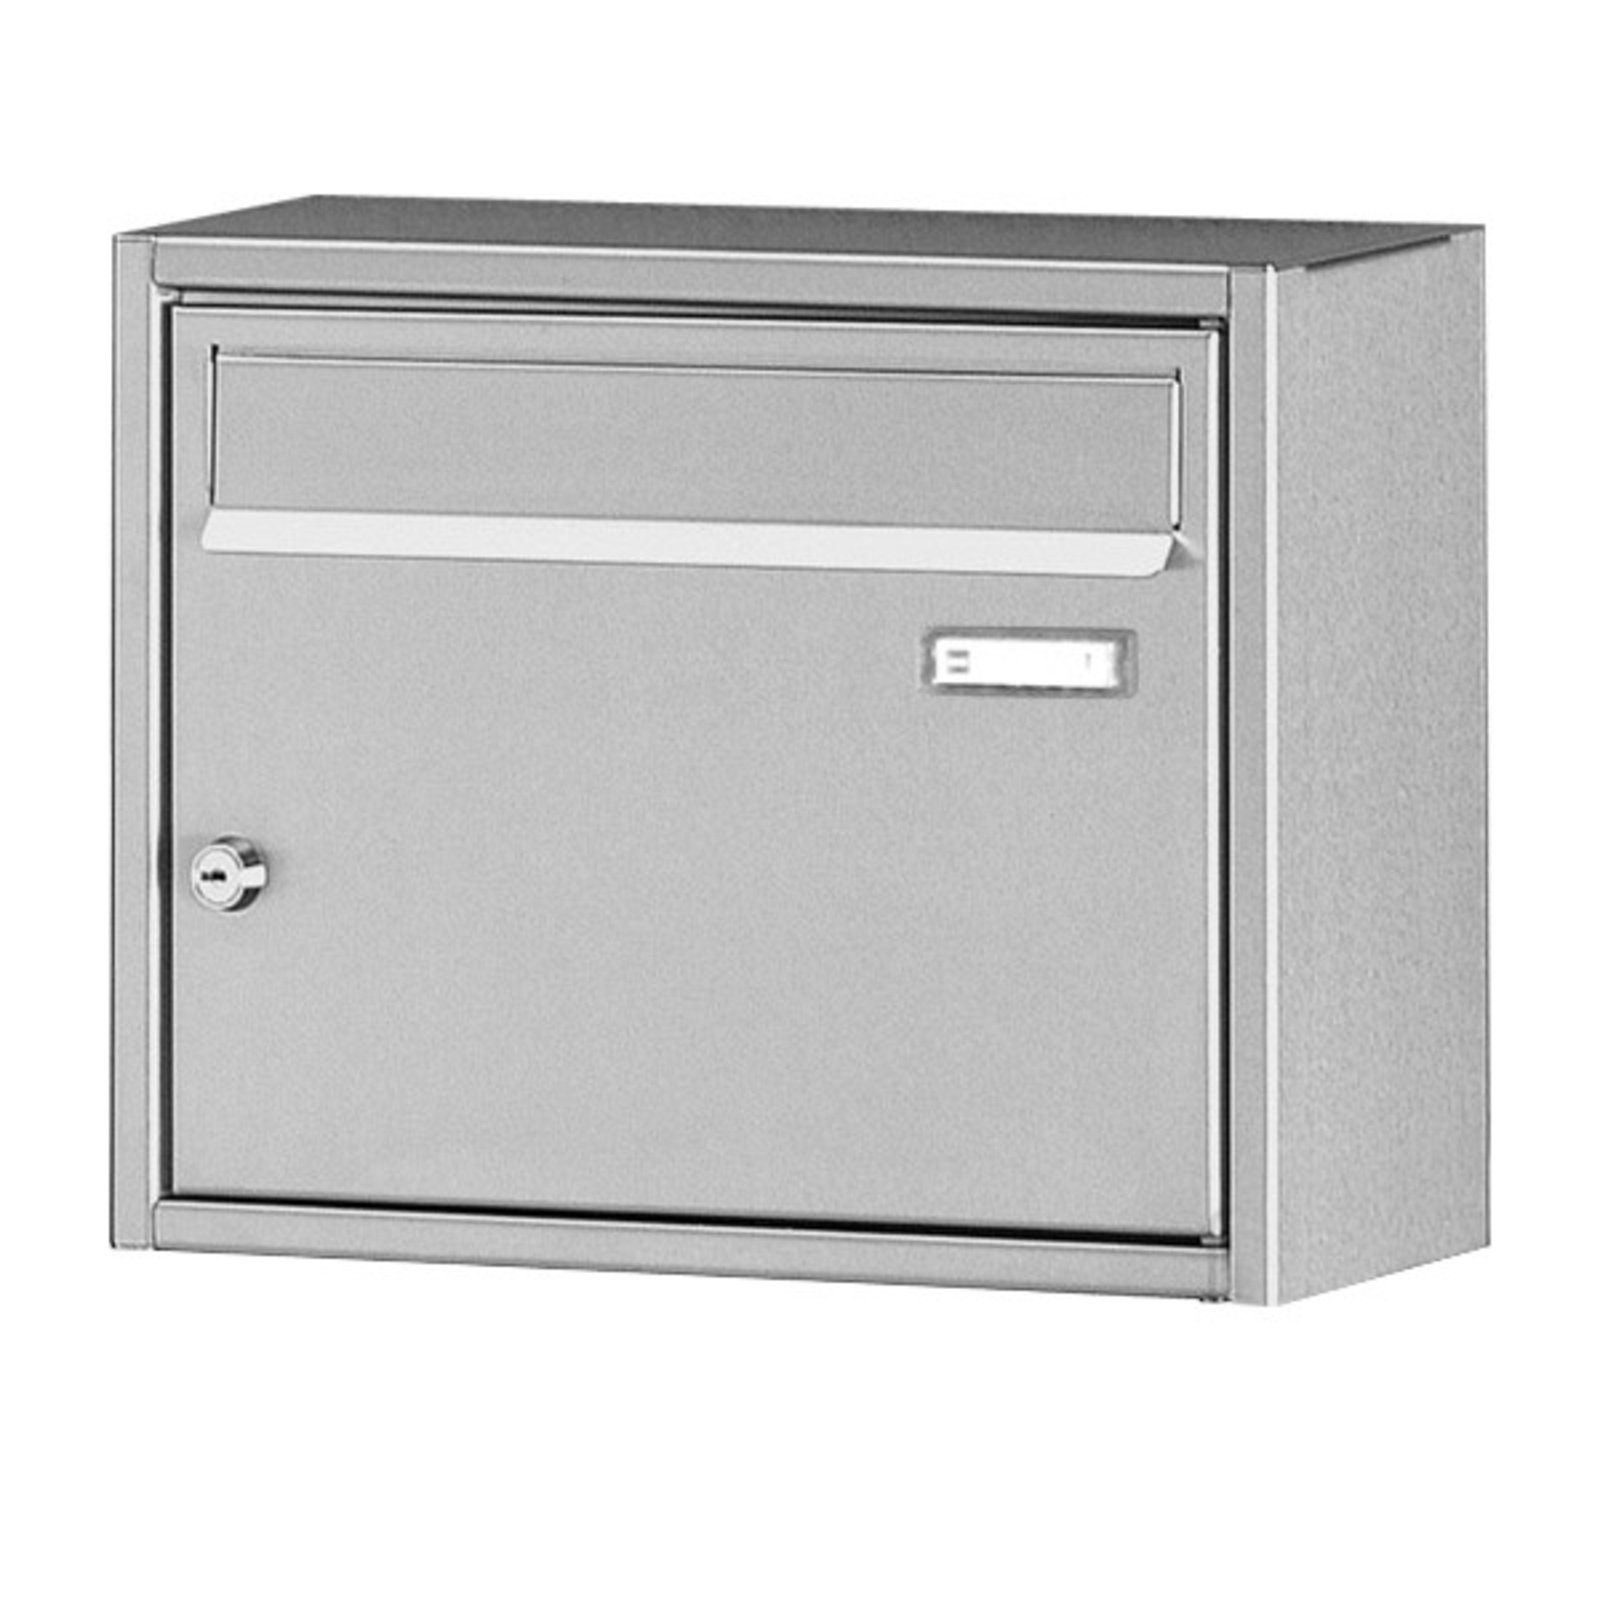 Valuable stainless steel letterbox Rom